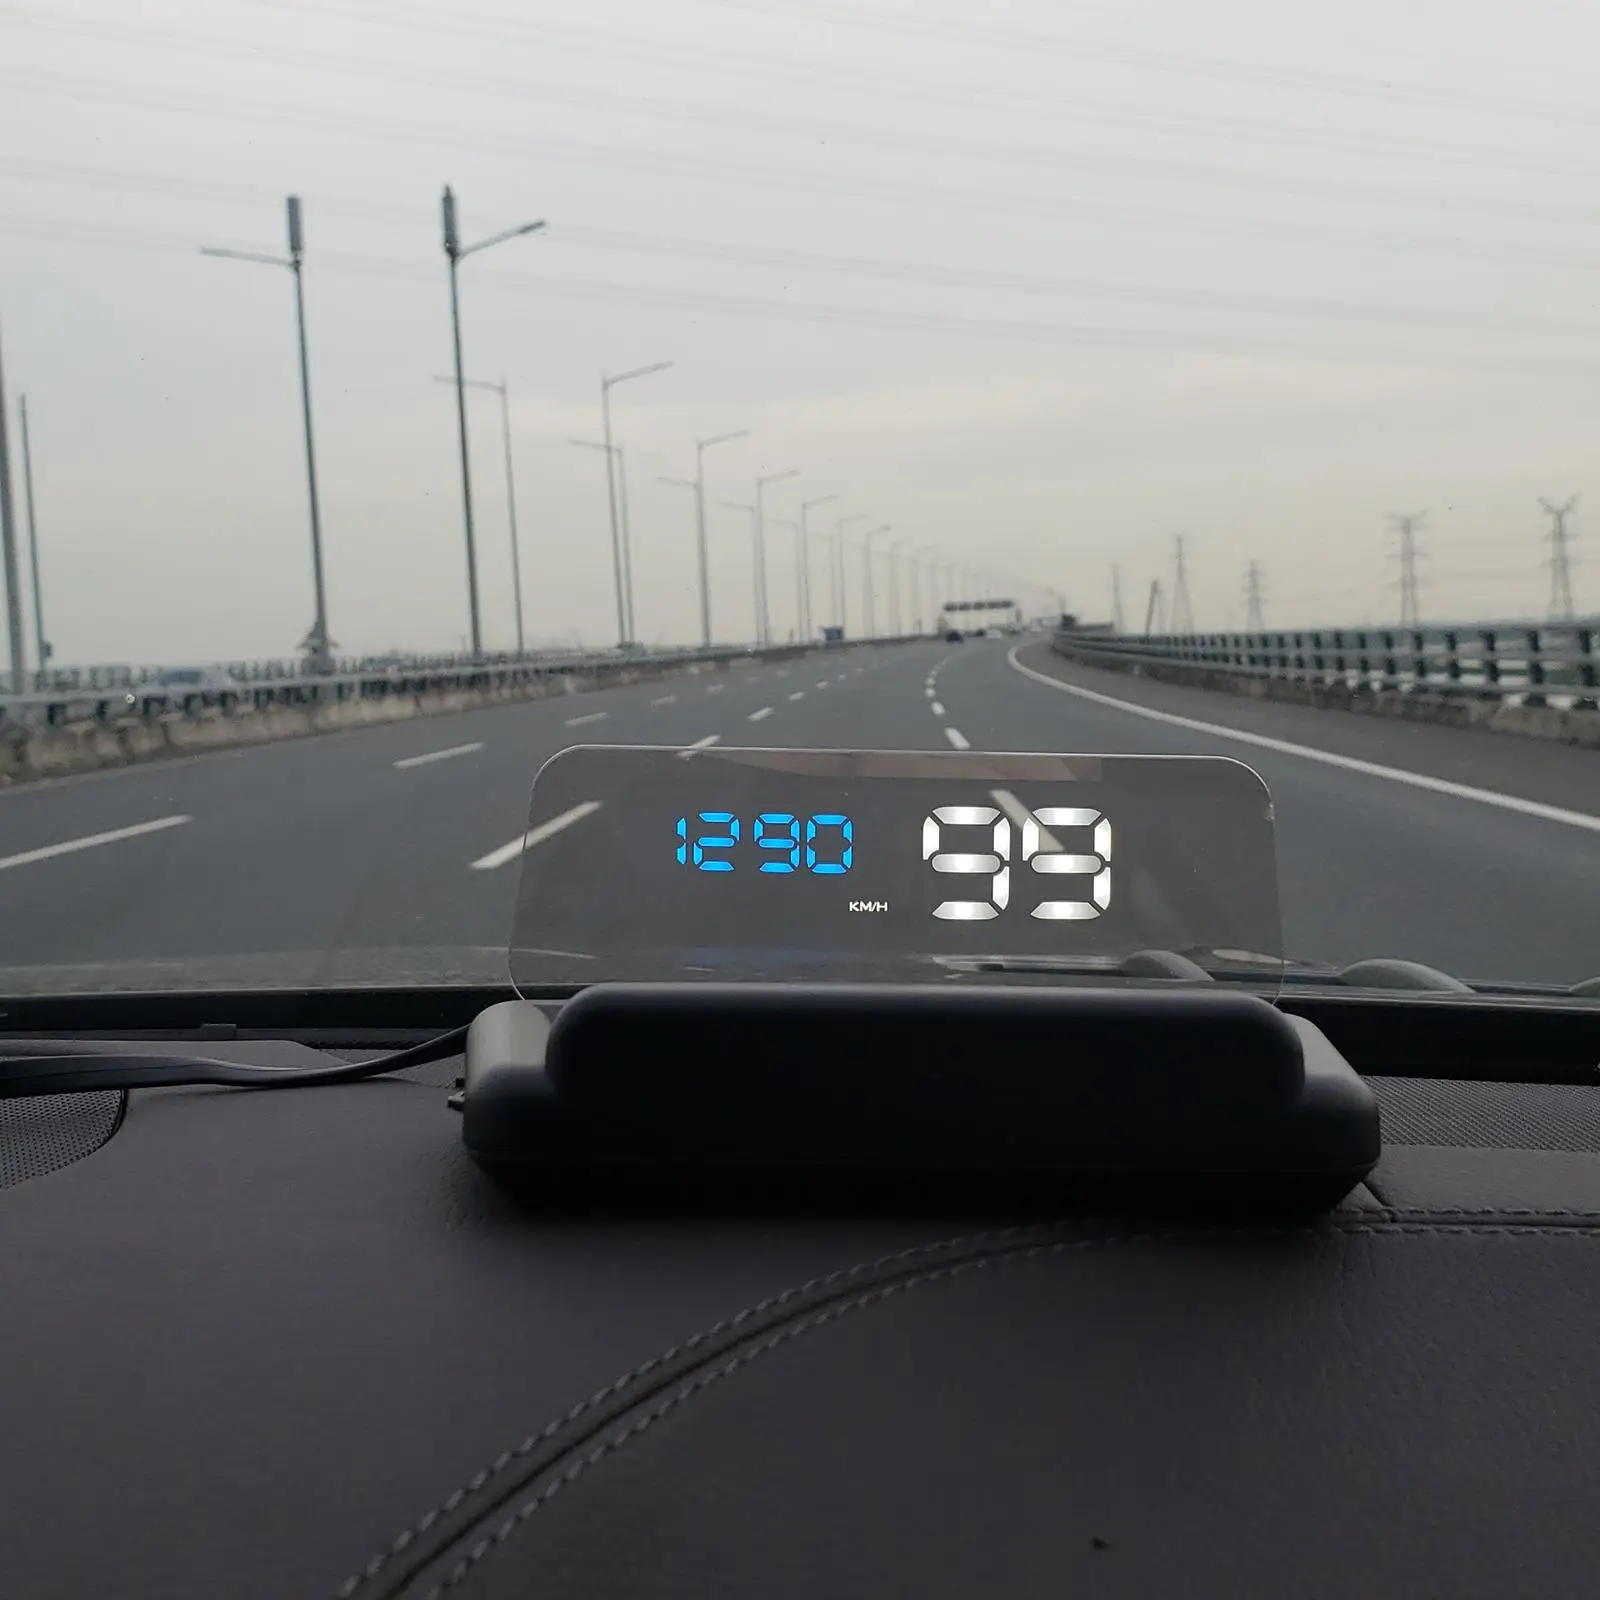 Head up Display Overspeed Alarm Fatigue Driving Alert with Transparent Display Panel Universal HUD Projection for All Cars